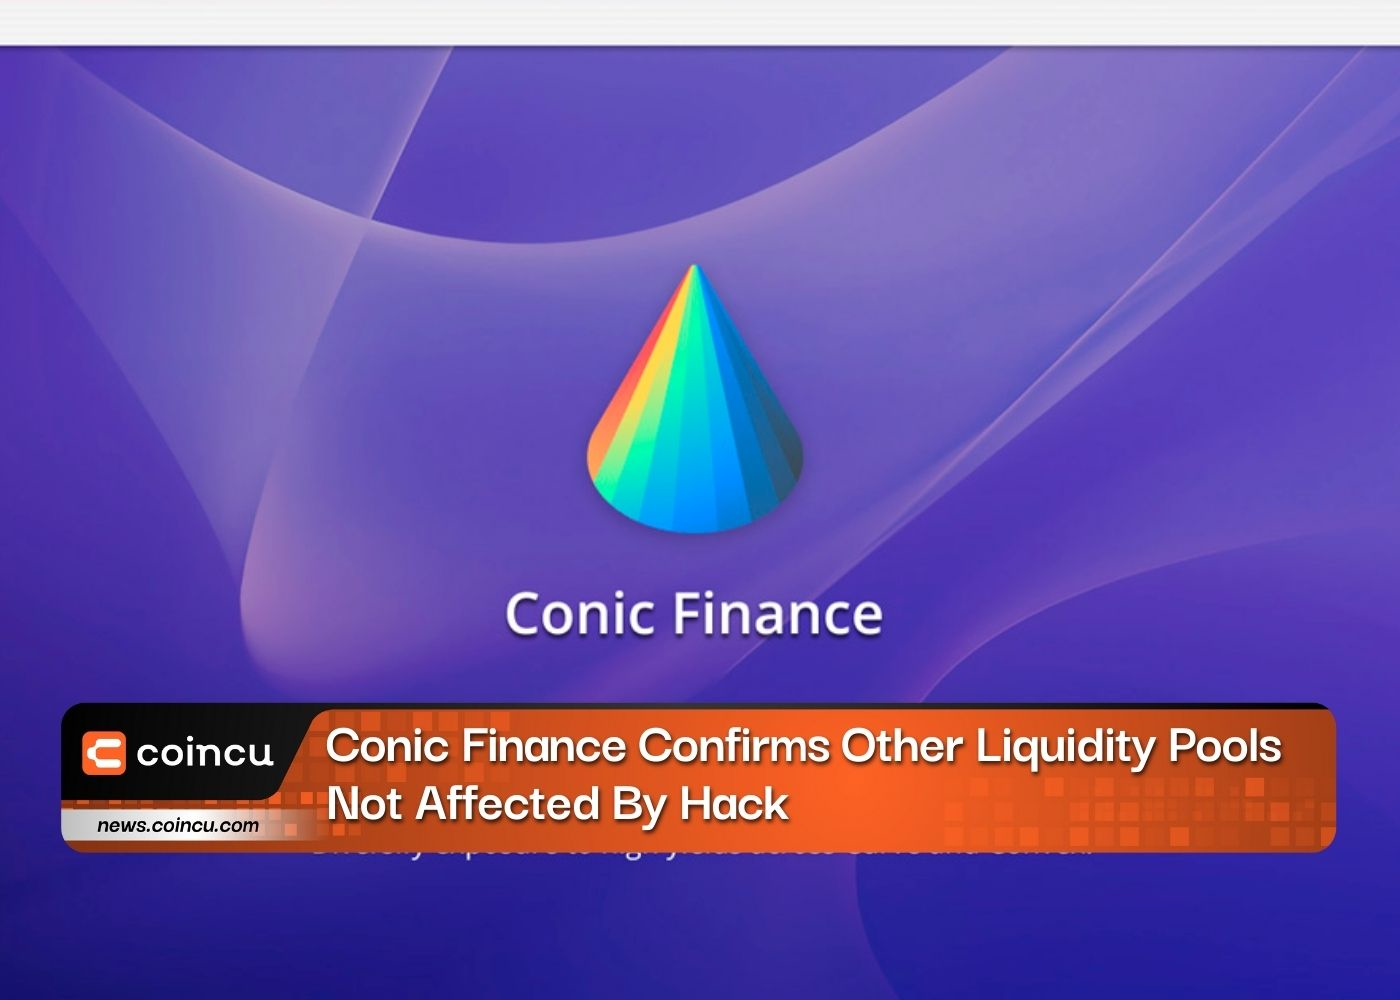 Conic Finance Confirms Other Liquidity Pools Not Affected By Hack